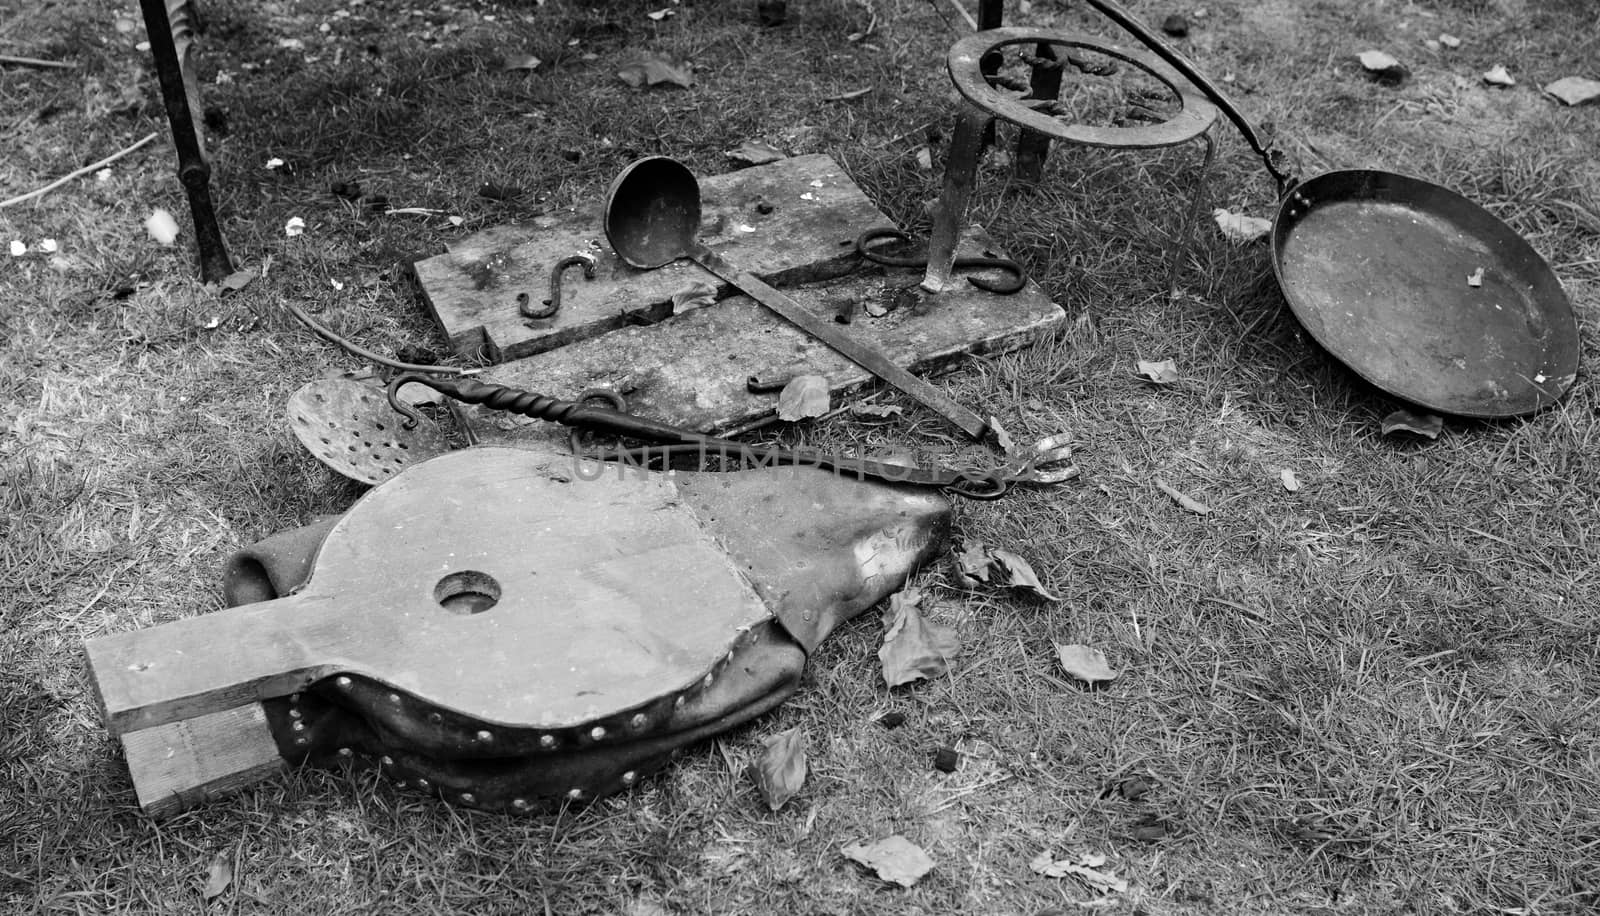 Bellows, ladle, poker and frying pan - authentic campfire details at a Medieval Fair - monochrome processing